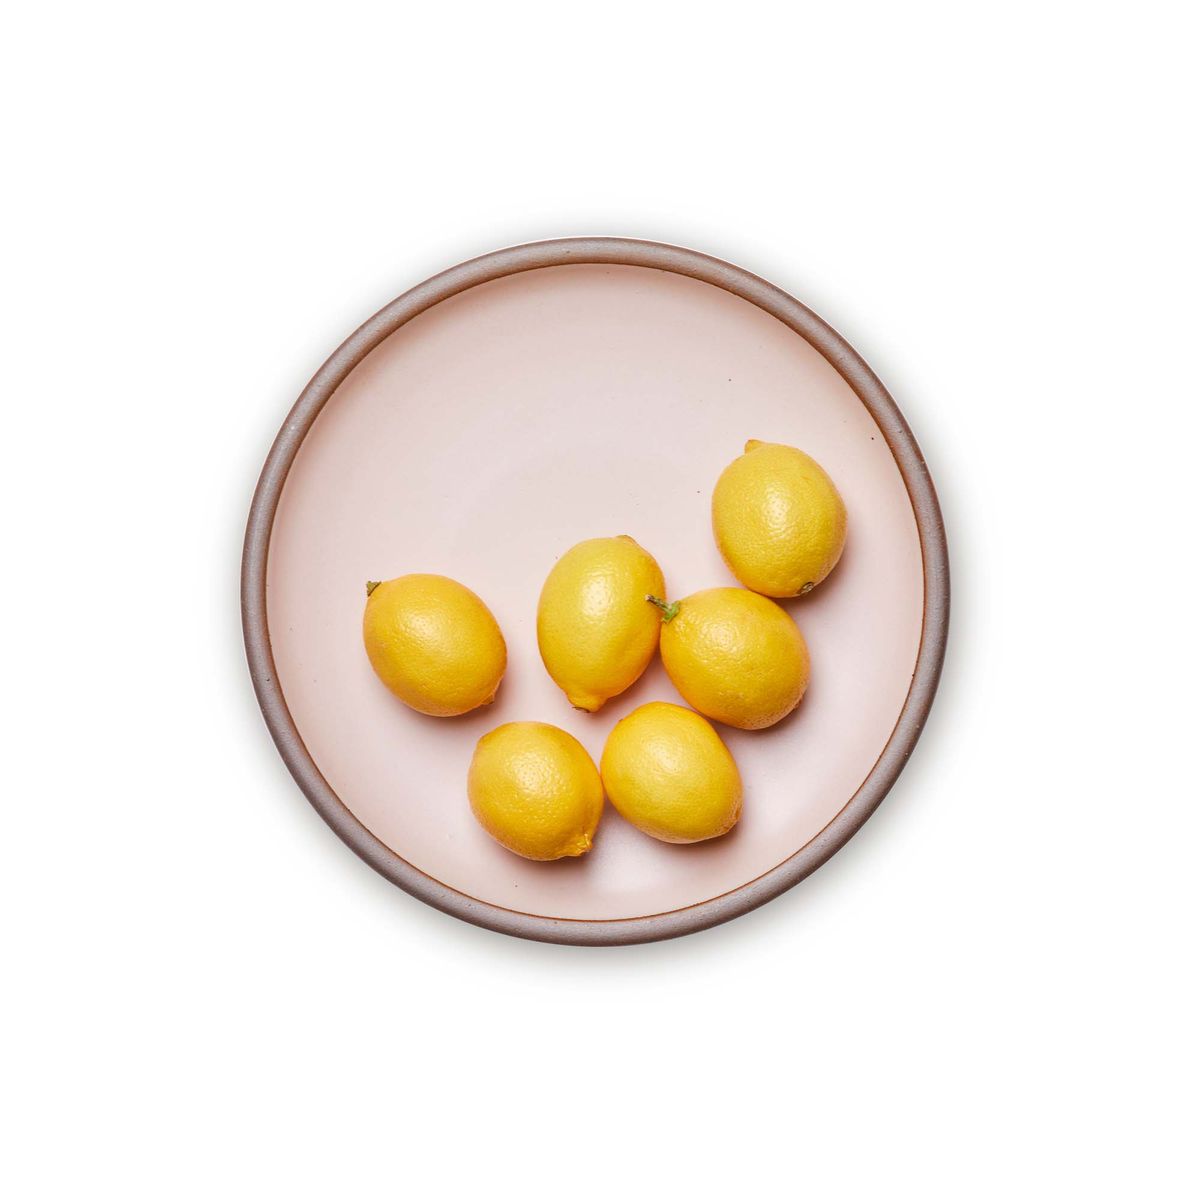 Lemons on a dinner sized ceramic plate in a soft light pink color featuring iron speckles and an unglazed rim